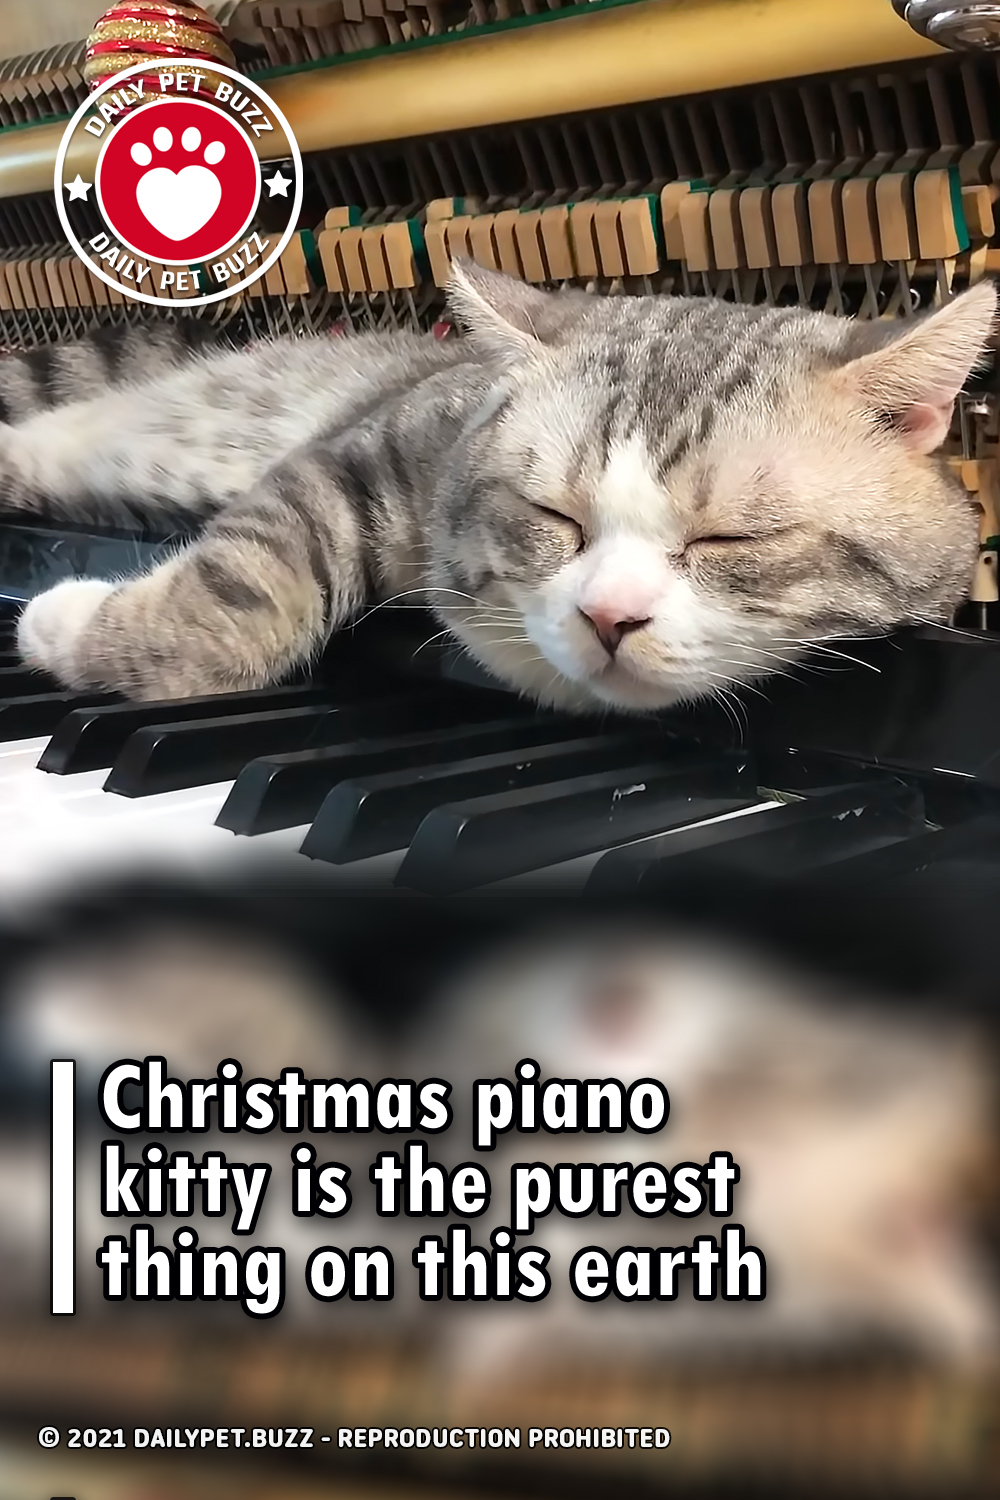 Christmas piano kitty is the purest thing on this earth